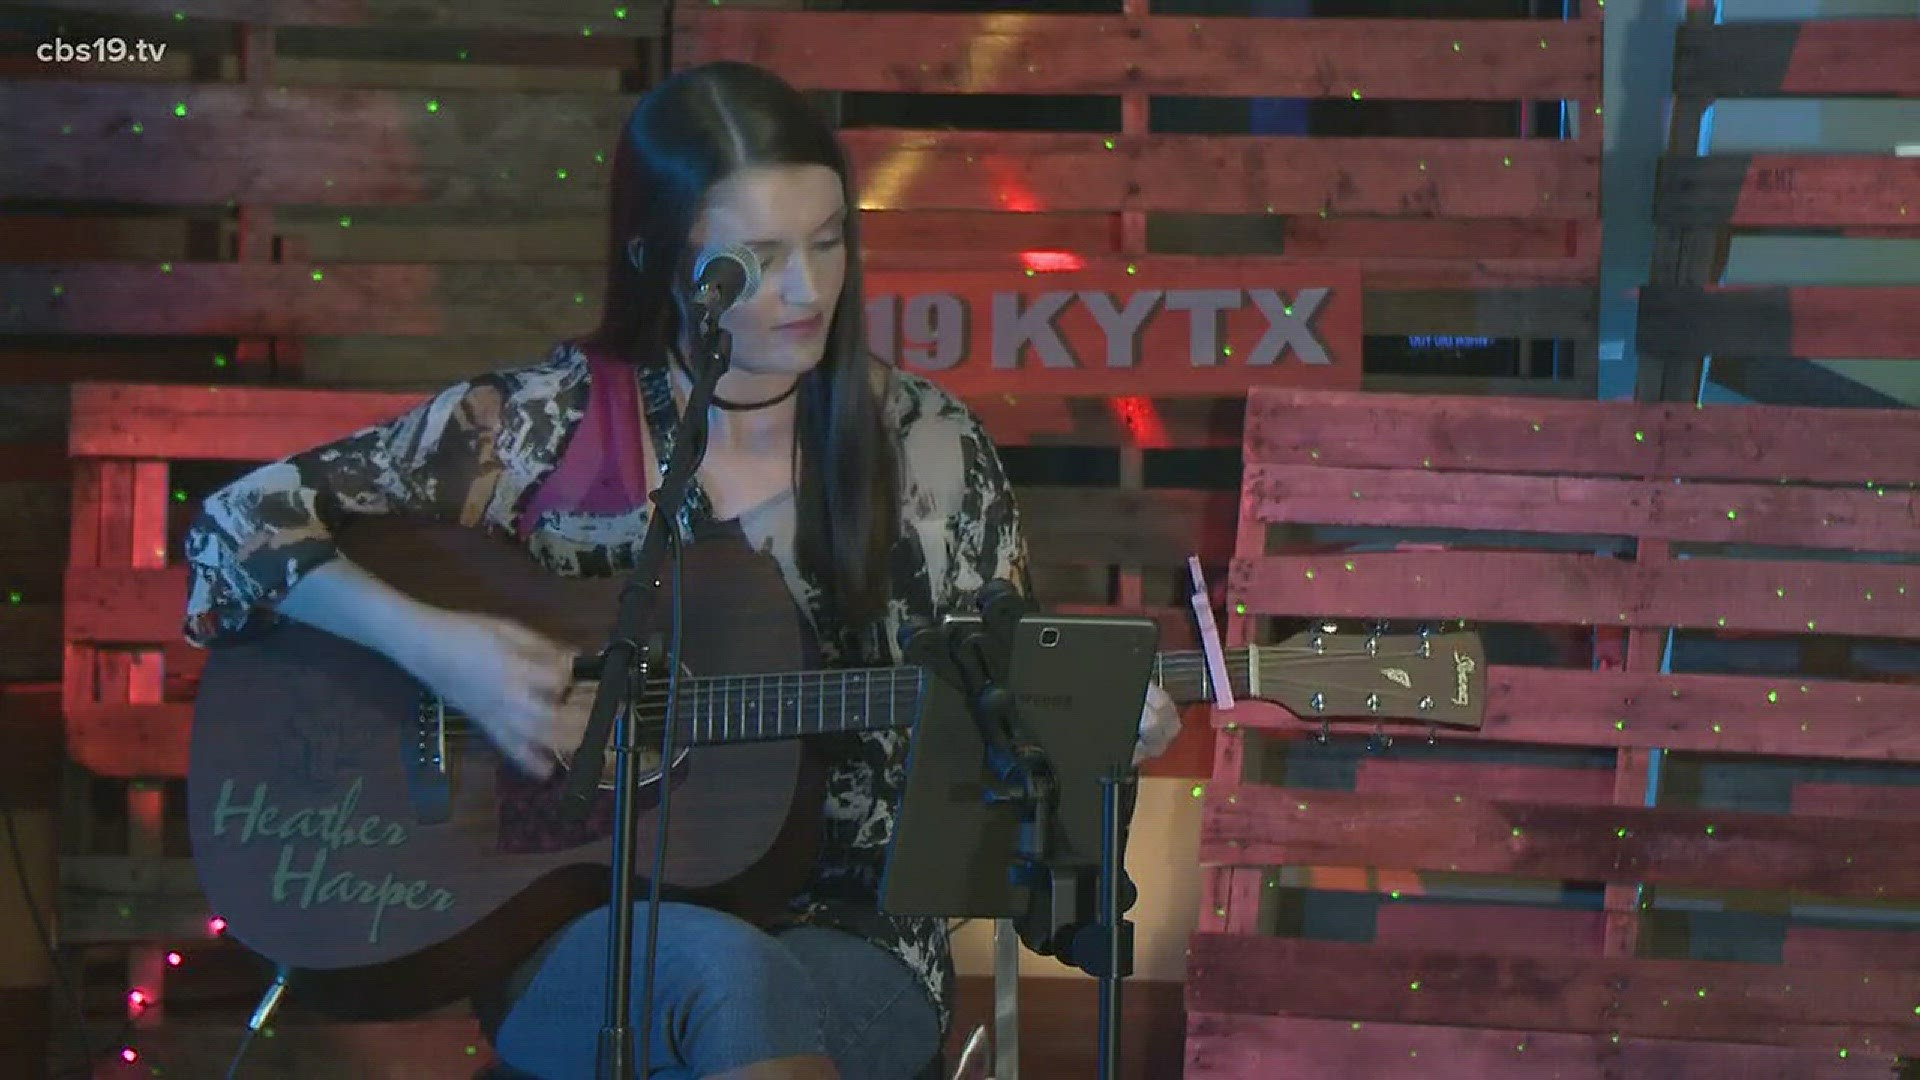 East Texas singer-songwriter, Heather Nikole Harper brings her talents to the CBS 19 stage!